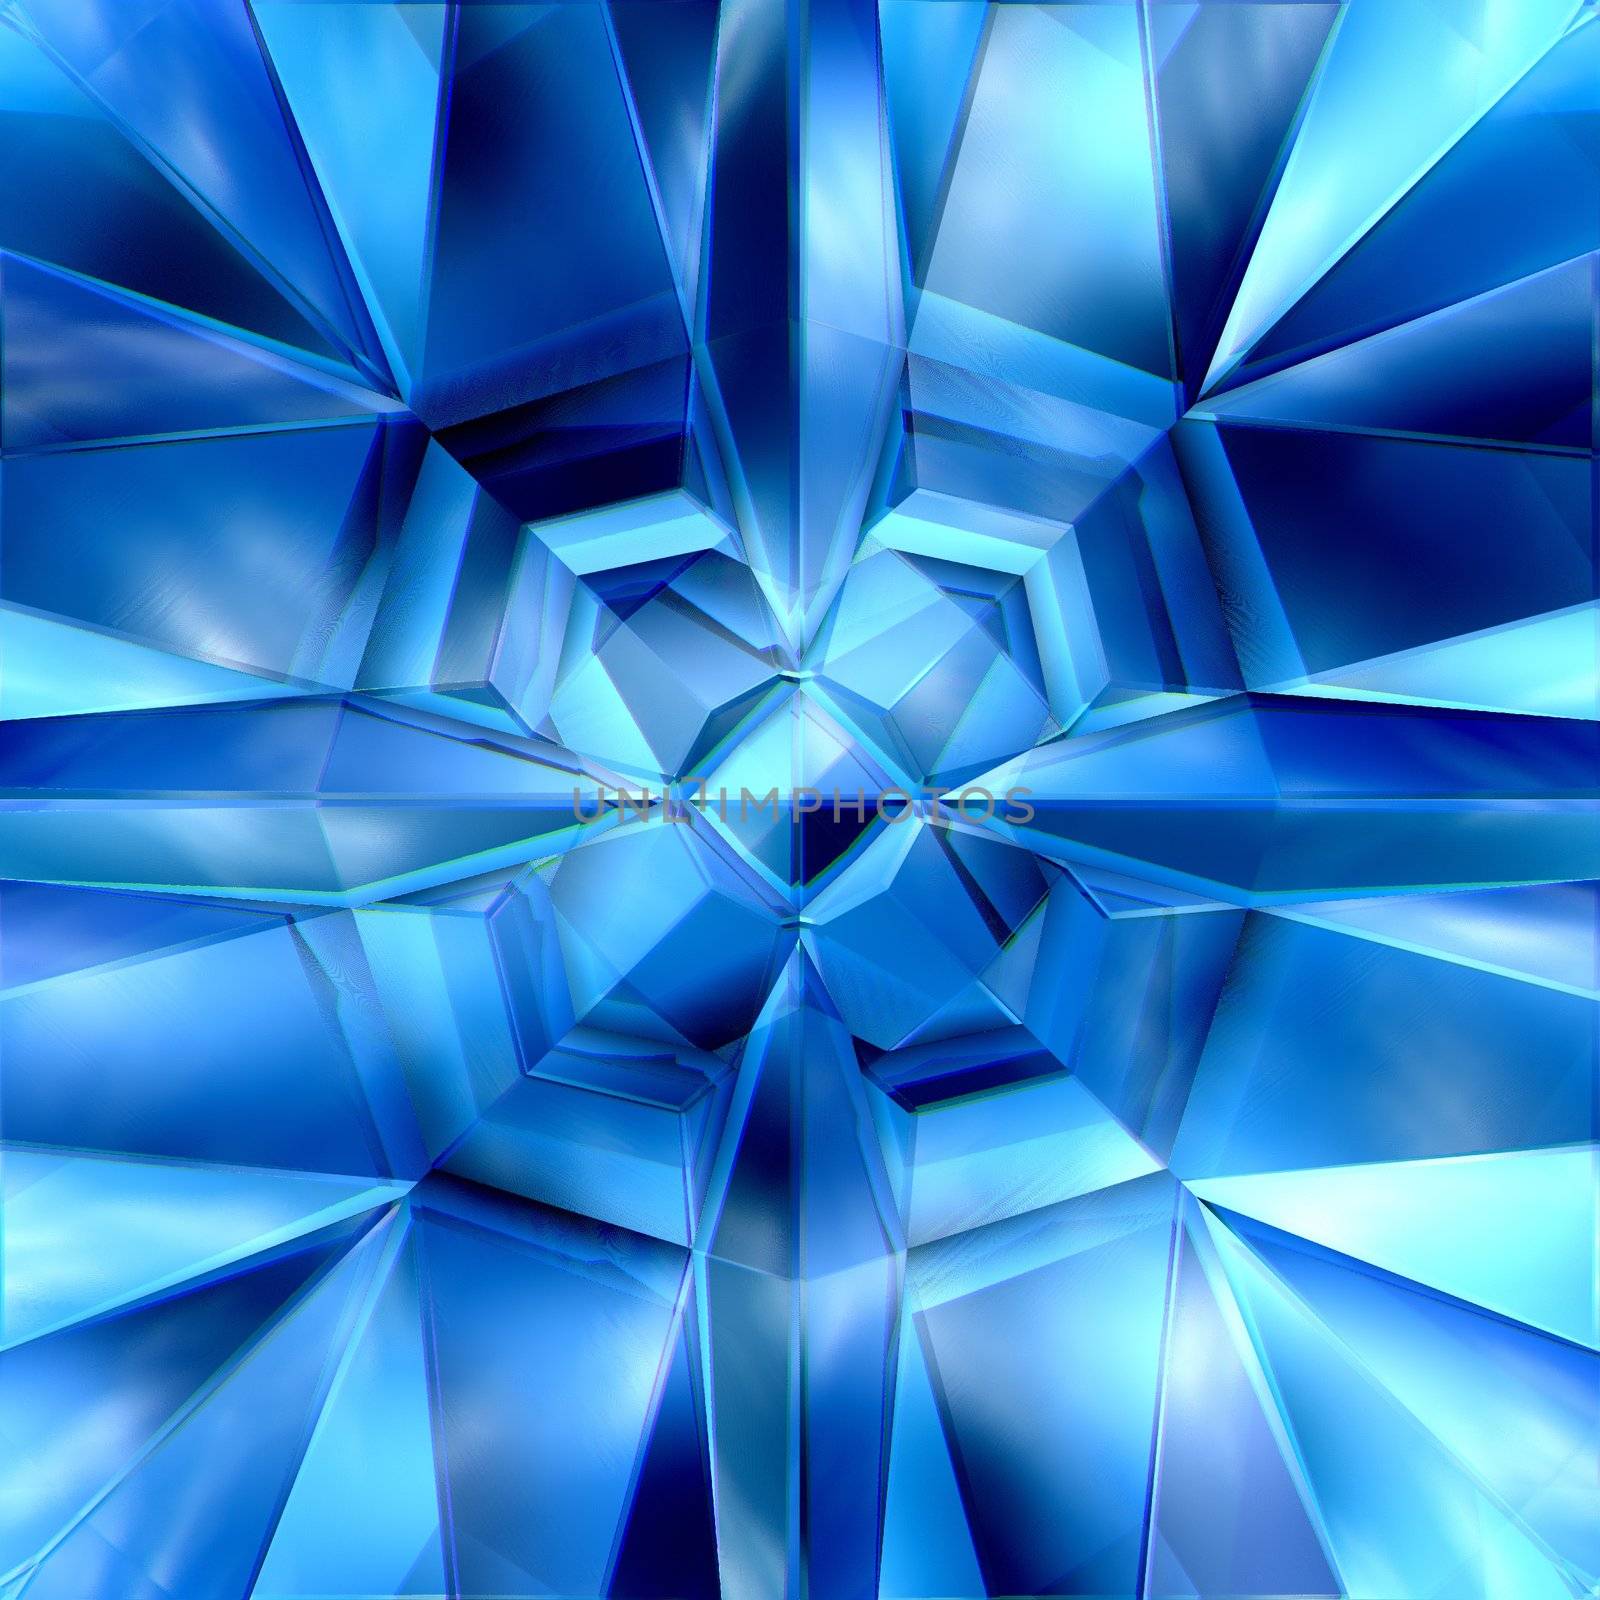 large abstract image of a blue crystal